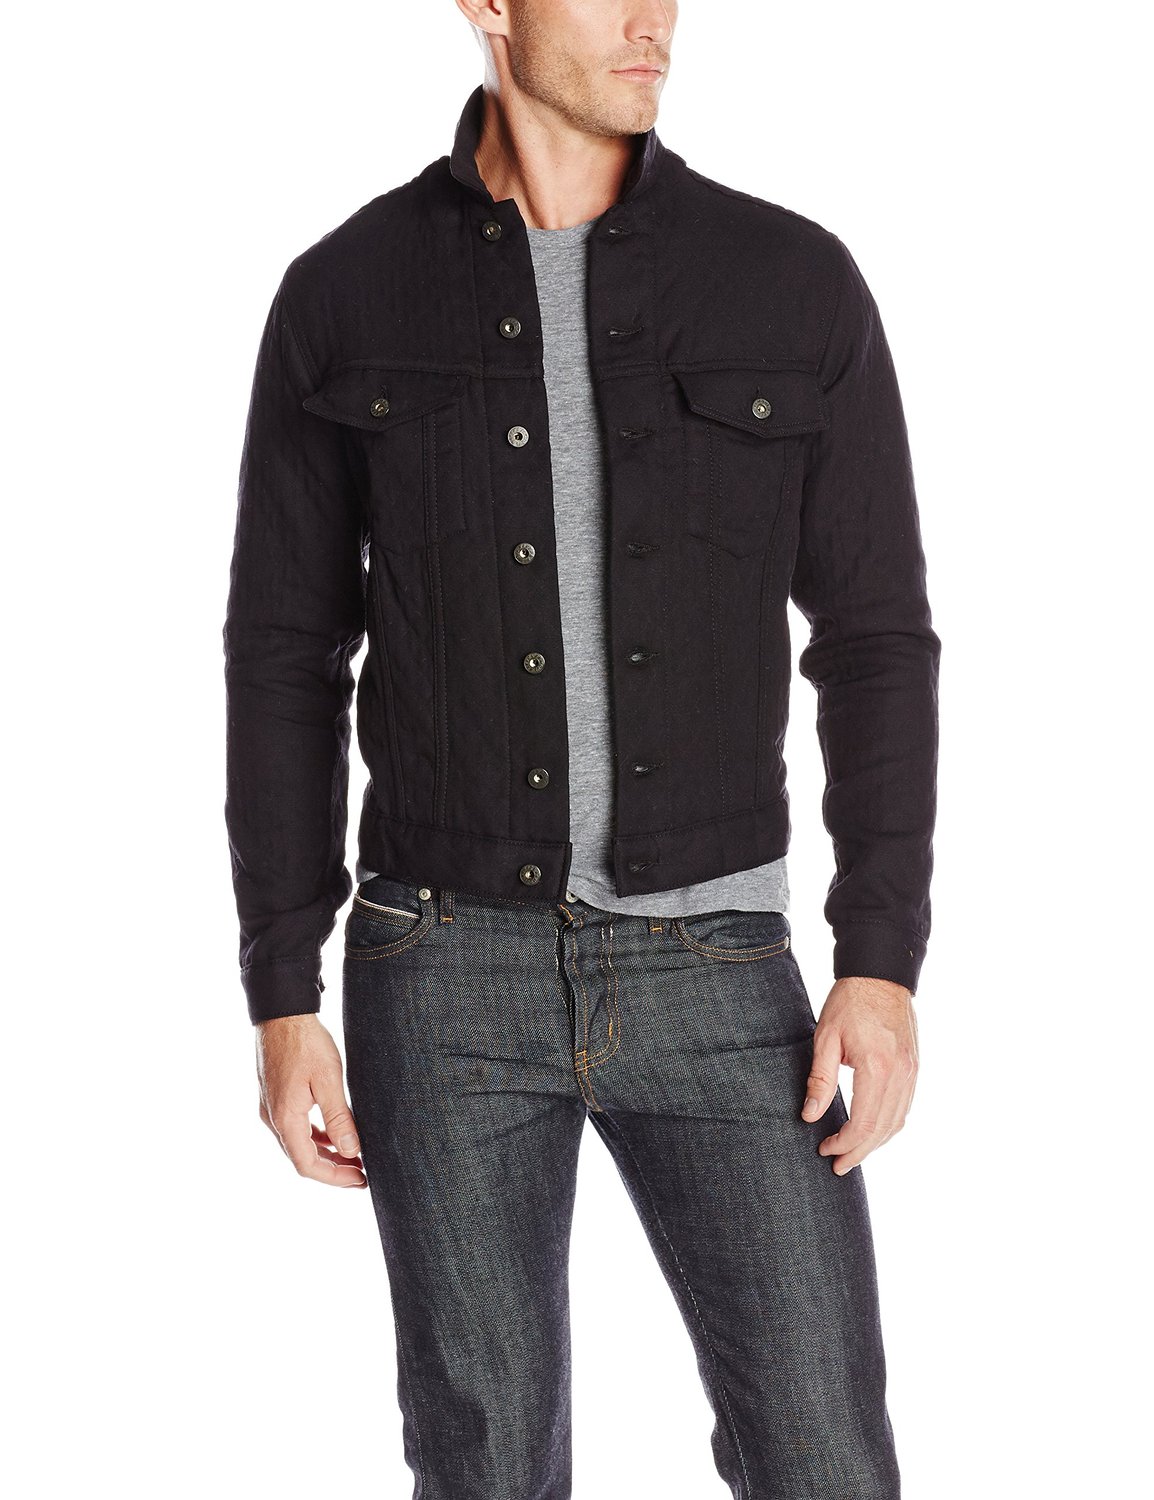 Naked & Famous Denim Men's Quilted Cotton Wool Jacket